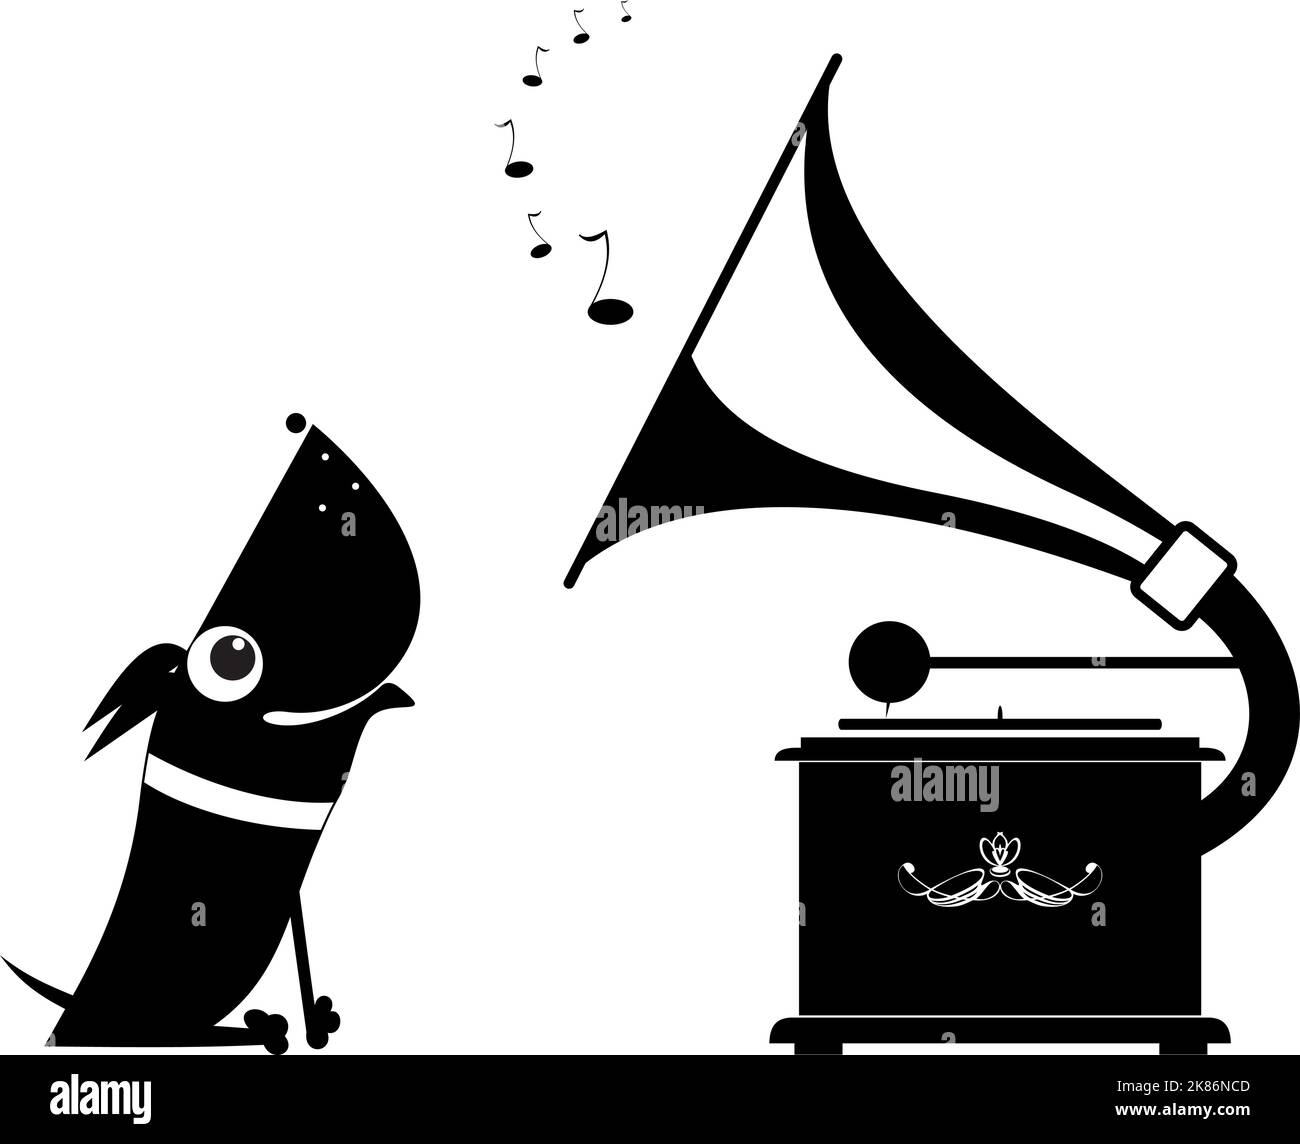 Retro record player. Howling or singing dog.  Dog listening a retro record player and singing or howling. Black on white background Stock Vector